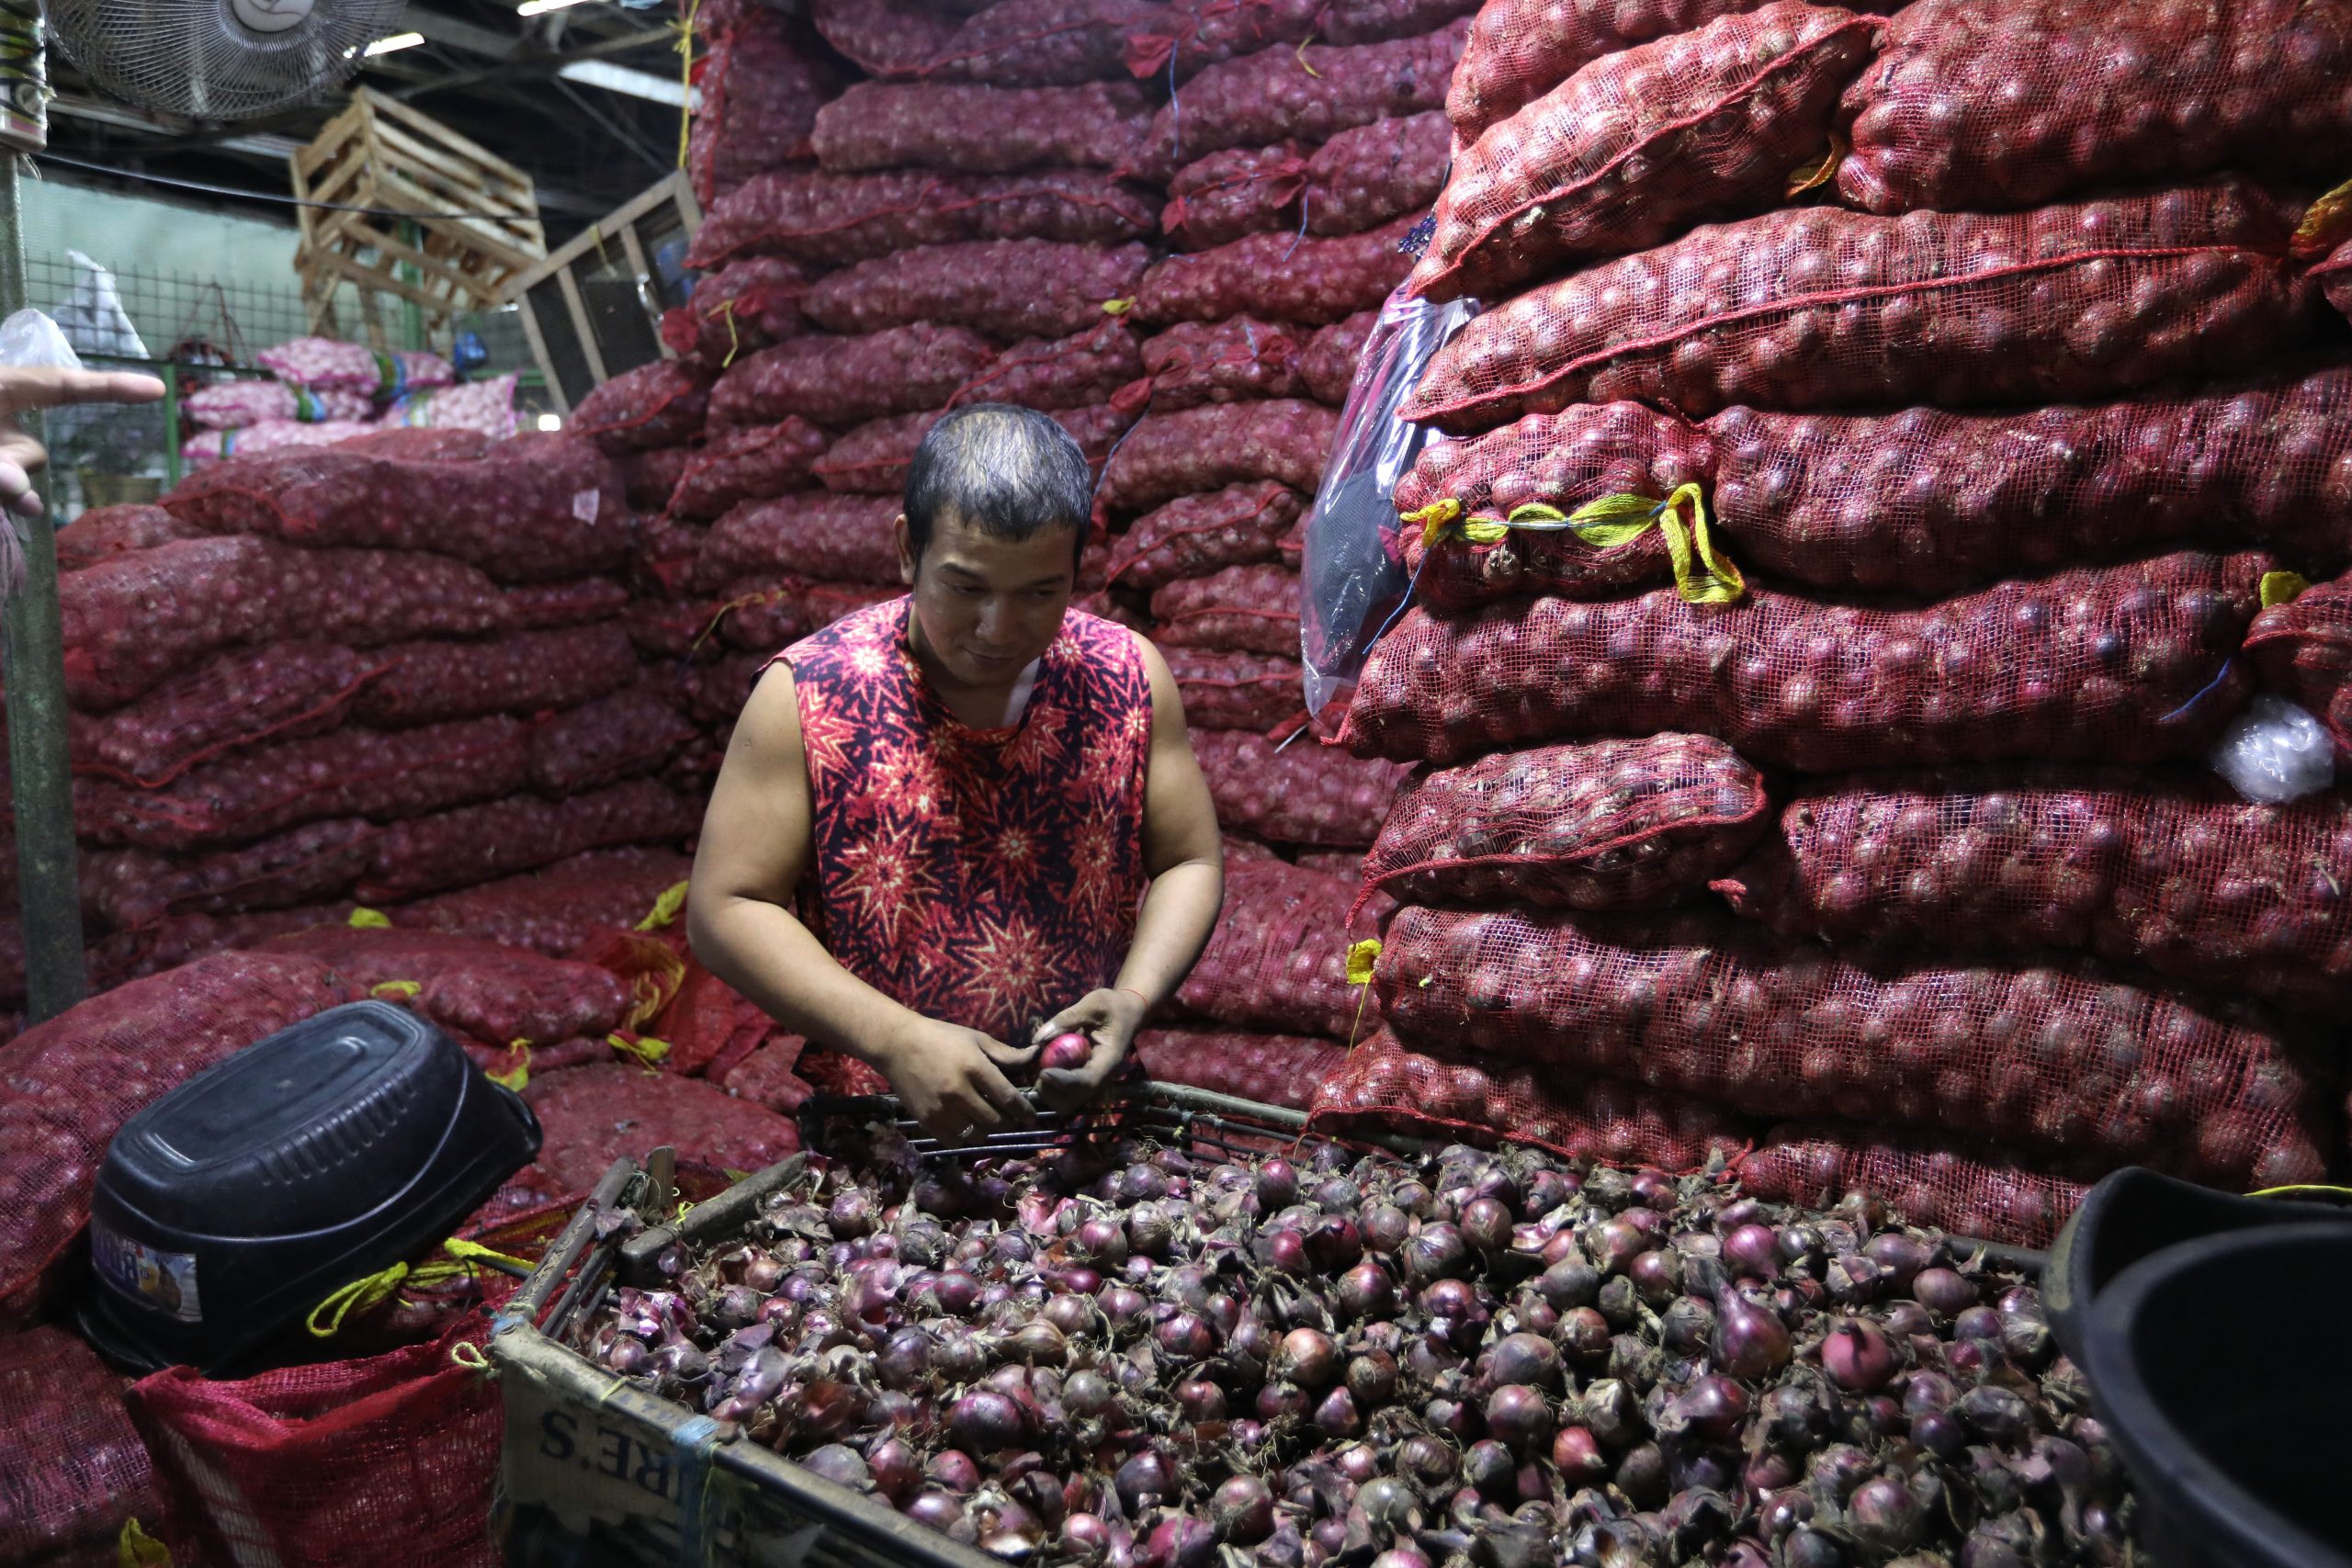 vendor removes the excess skin of red onions